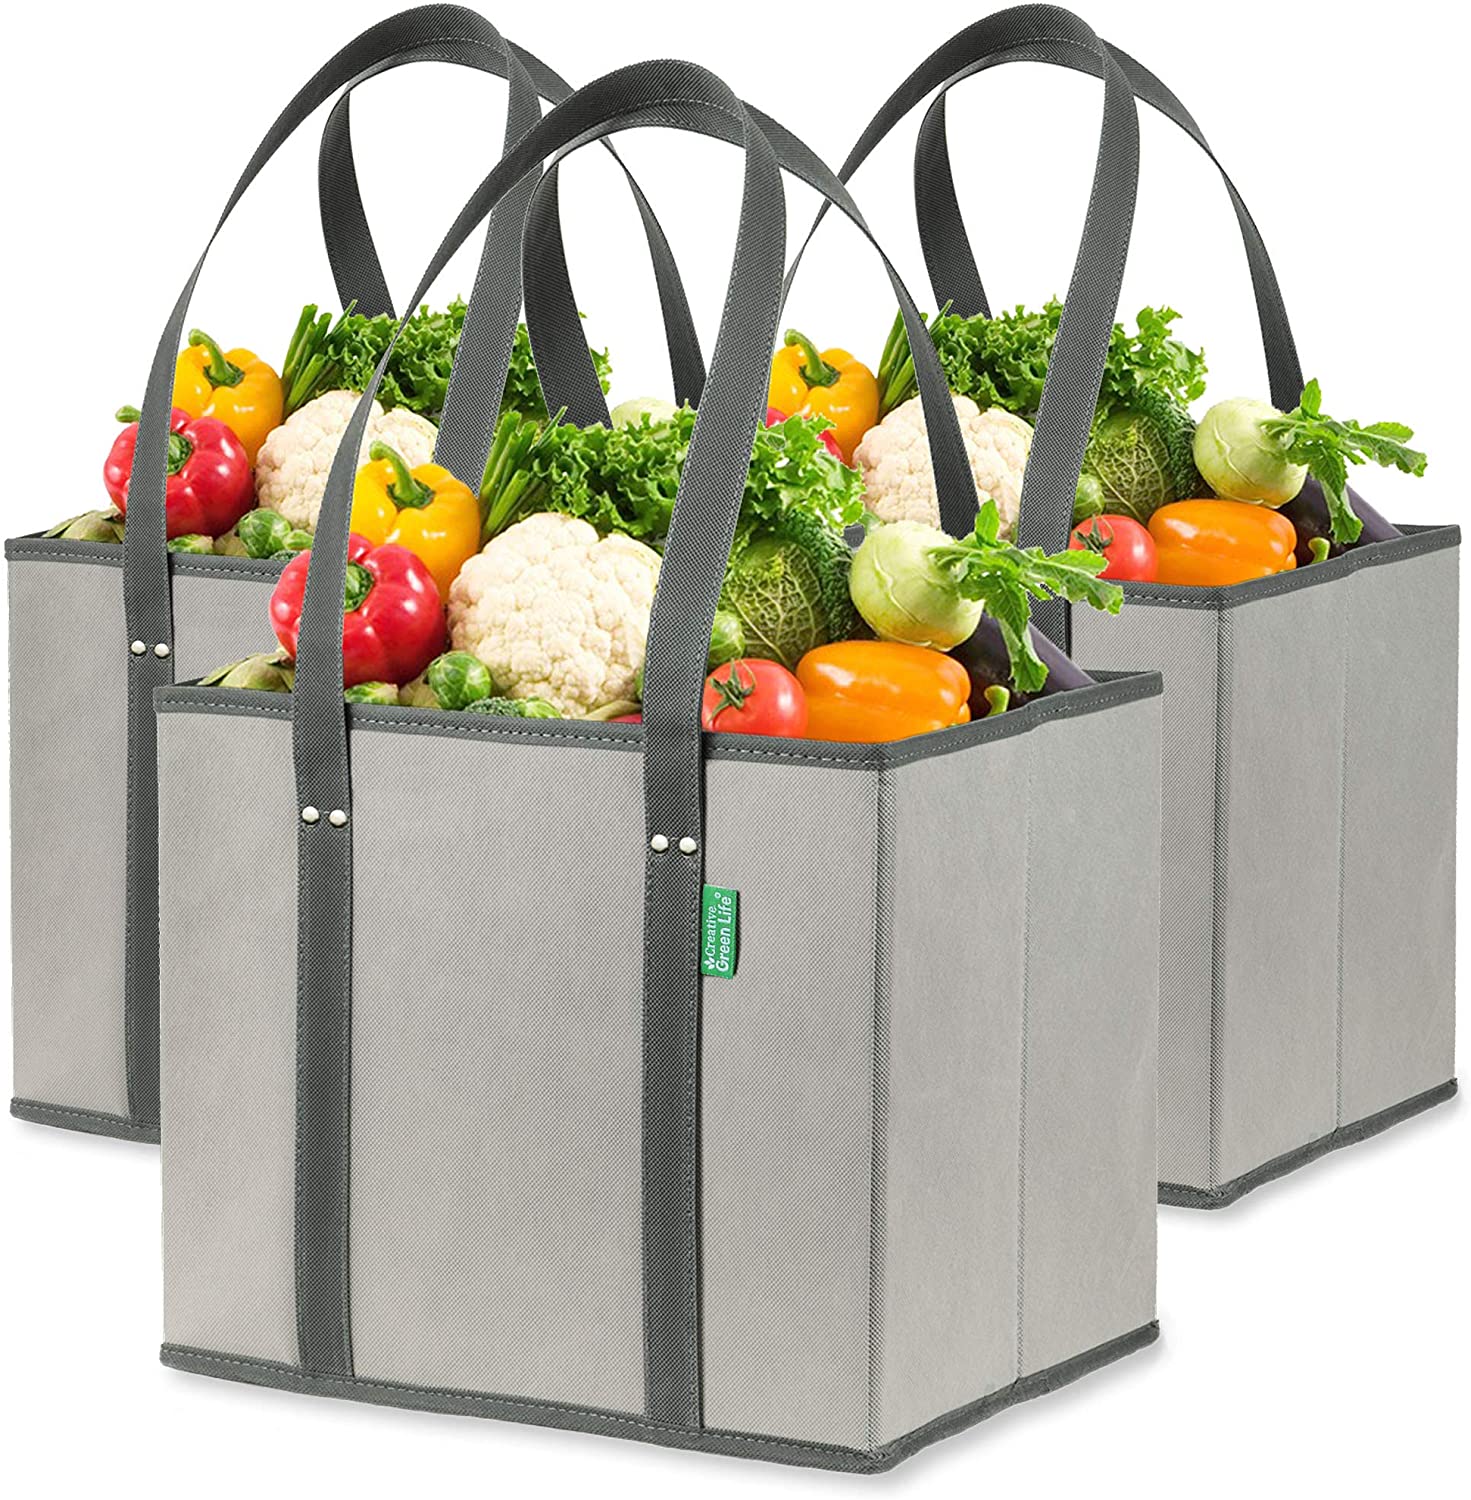 Reusable Grocery Shopping Box Bags (3 Pack - Gray). Large, Premium Quality | Stocking Stuffer For Foodies | Amazon Stocking Stuffers | Stocking stuffers For Adults | stocking stuffers for men | mens stocking stuffers | Stocking stuffers for her | Stocking stuffers for guys | Cheap stocking stuffers | Best stocking stuffers | Stocking stuffers for wife | stocking stuffer gifts | Best stocking stuffers